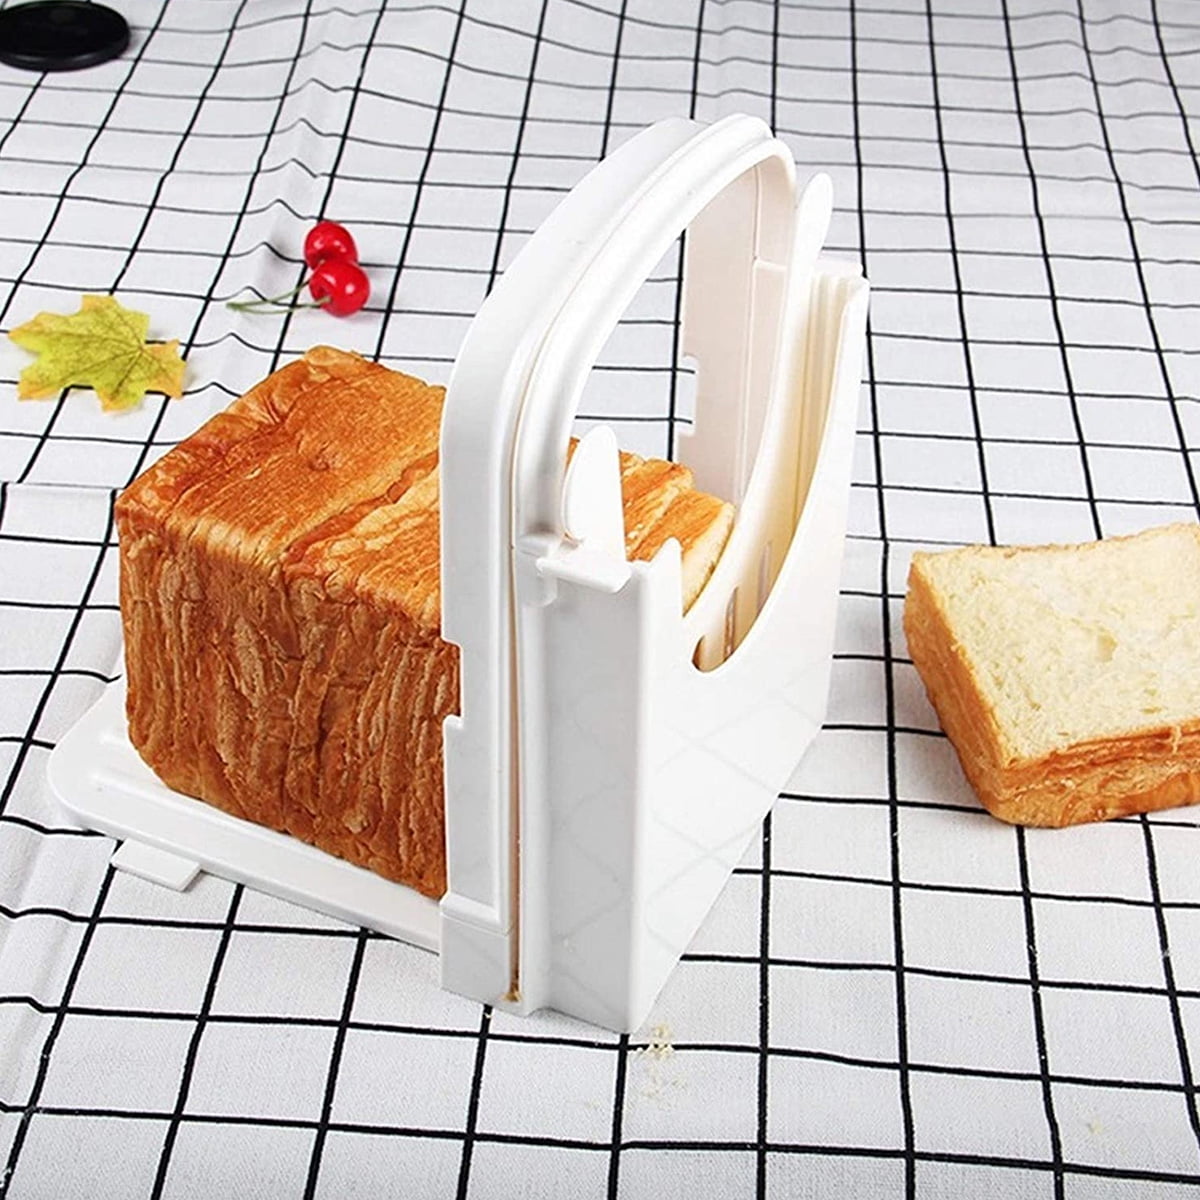 PULABO Bread Slicer,Adjustable Toast Slicer,Foldable and Customizable Loaf  Cutter with Cutting Board for Homemade Bread & Loaf Cakes Tools to 5  Thickness